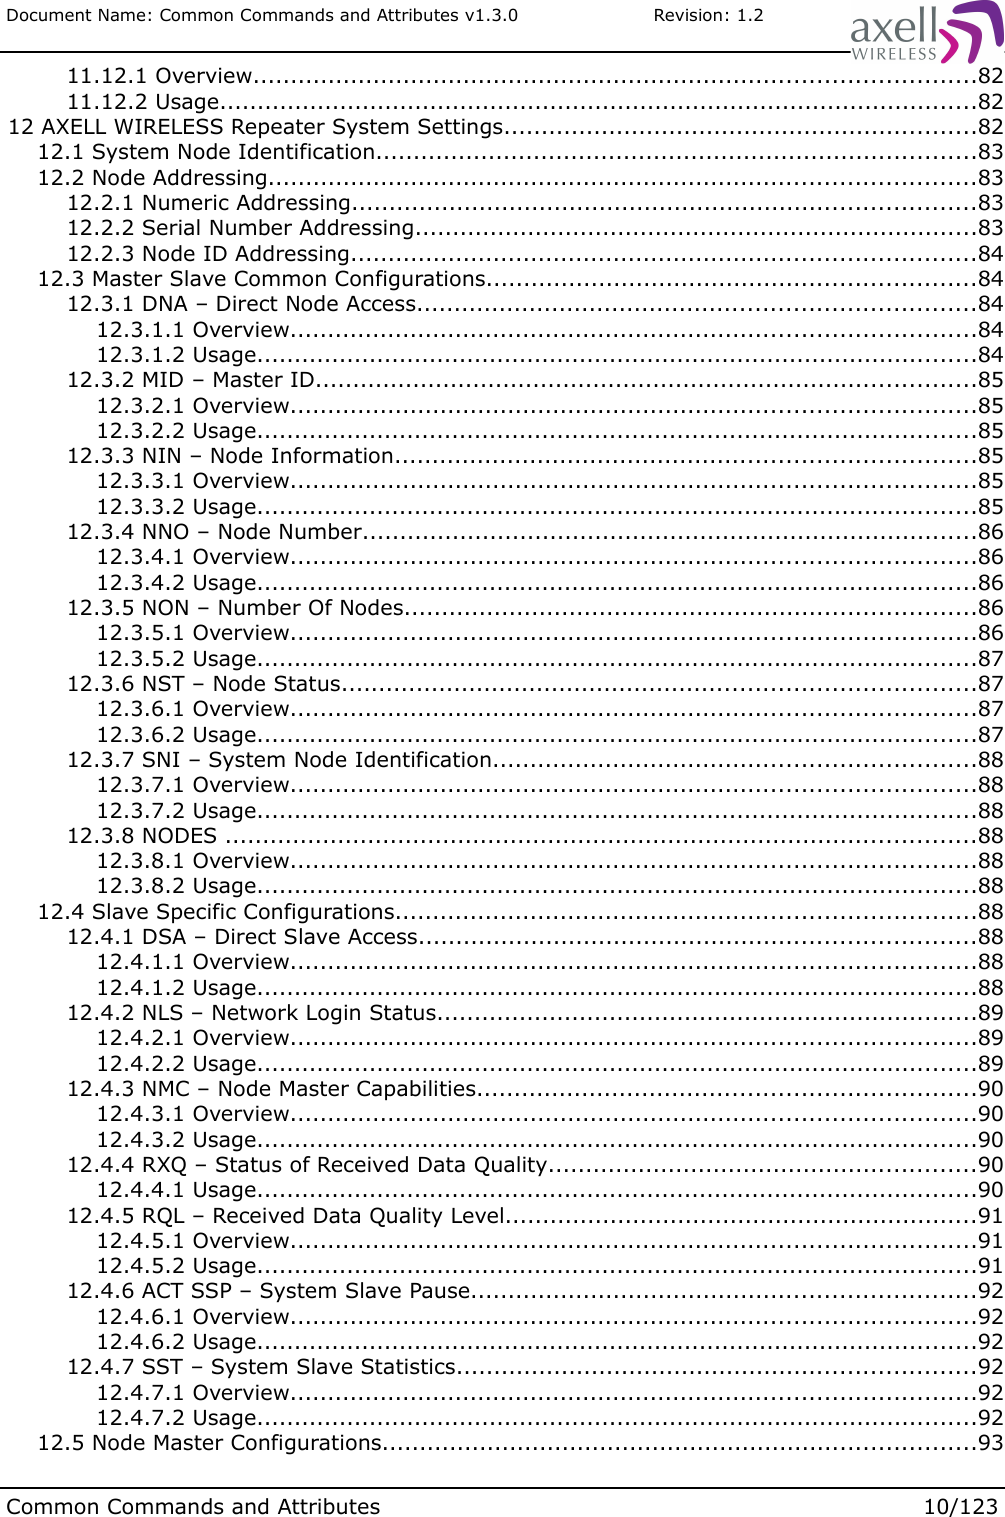 Document Name: Common Commands and Attributes v1.3.0                       Revision: 1.2 11.12.1 Overview................................................................................................82 11.12.2 Usage.....................................................................................................82 12 AXELL WIRELESS Repeater System Settings...............................................................82 12.1 System Node Identification................................................................................83 12.2 Node Addressing..............................................................................................83 12.2.1 Numeric Addressing...................................................................................83 12.2.2 Serial Number Addressing...........................................................................83 12.2.3 Node ID Addressing...................................................................................84 12.3 Master Slave Common Configurations.................................................................84 12.3.1 DNA – Direct Node Access..........................................................................84 12.3.1.1 Overview...........................................................................................84 12.3.1.2 Usage................................................................................................84 12.3.2 MID – Master ID........................................................................................85 12.3.2.1 Overview...........................................................................................85 12.3.2.2 Usage................................................................................................85 12.3.3 NIN – Node Information.............................................................................85 12.3.3.1 Overview...........................................................................................85 12.3.3.2 Usage................................................................................................85 12.3.4 NNO – Node Number..................................................................................86 12.3.4.1 Overview...........................................................................................86 12.3.4.2 Usage................................................................................................86 12.3.5 NON – Number Of Nodes............................................................................86 12.3.5.1 Overview...........................................................................................86 12.3.5.2 Usage................................................................................................87 12.3.6 NST – Node Status....................................................................................87 12.3.6.1 Overview...........................................................................................87 12.3.6.2 Usage................................................................................................87 12.3.7 SNI – System Node Identification................................................................88 12.3.7.1 Overview...........................................................................................88 12.3.7.2 Usage................................................................................................88 12.3.8 NODES ....................................................................................................88 12.3.8.1 Overview...........................................................................................88 12.3.8.2 Usage................................................................................................88 12.4 Slave Specific Configurations.............................................................................88 12.4.1 DSA – Direct Slave Access..........................................................................88 12.4.1.1 Overview...........................................................................................88 12.4.1.2 Usage................................................................................................88 12.4.2 NLS – Network Login Status........................................................................89 12.4.2.1 Overview...........................................................................................89 12.4.2.2 Usage................................................................................................89 12.4.3 NMC – Node Master Capabilities..................................................................90 12.4.3.1 Overview...........................................................................................90 12.4.3.2 Usage................................................................................................90 12.4.4 RXQ – Status of Received Data Quality.........................................................90 12.4.4.1 Usage................................................................................................90 12.4.5 RQL – Received Data Quality Level...............................................................91 12.4.5.1 Overview...........................................................................................91 12.4.5.2 Usage................................................................................................91 12.4.6 ACT SSP – System Slave Pause...................................................................92 12.4.6.1 Overview...........................................................................................92 12.4.6.2 Usage................................................................................................92 12.4.7 SST – System Slave Statistics.....................................................................92 12.4.7.1 Overview...........................................................................................92 12.4.7.2 Usage................................................................................................92 12.5 Node Master Configurations...............................................................................93Common Commands and Attributes 10/123